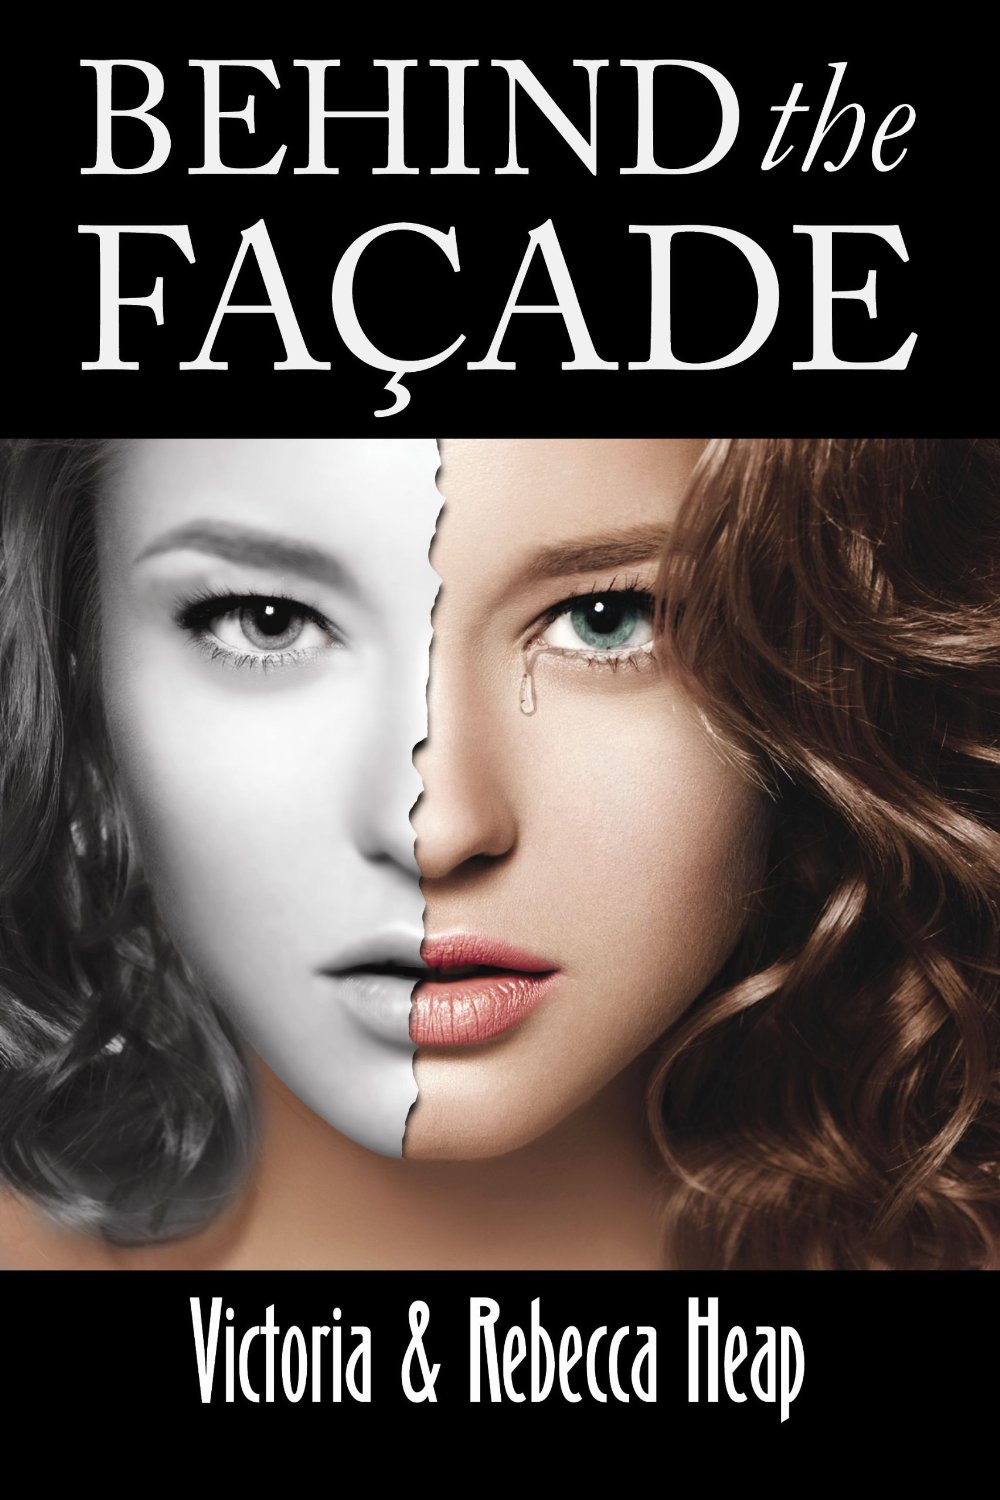 Behind the Facade by Victoria and Rebecca Heap